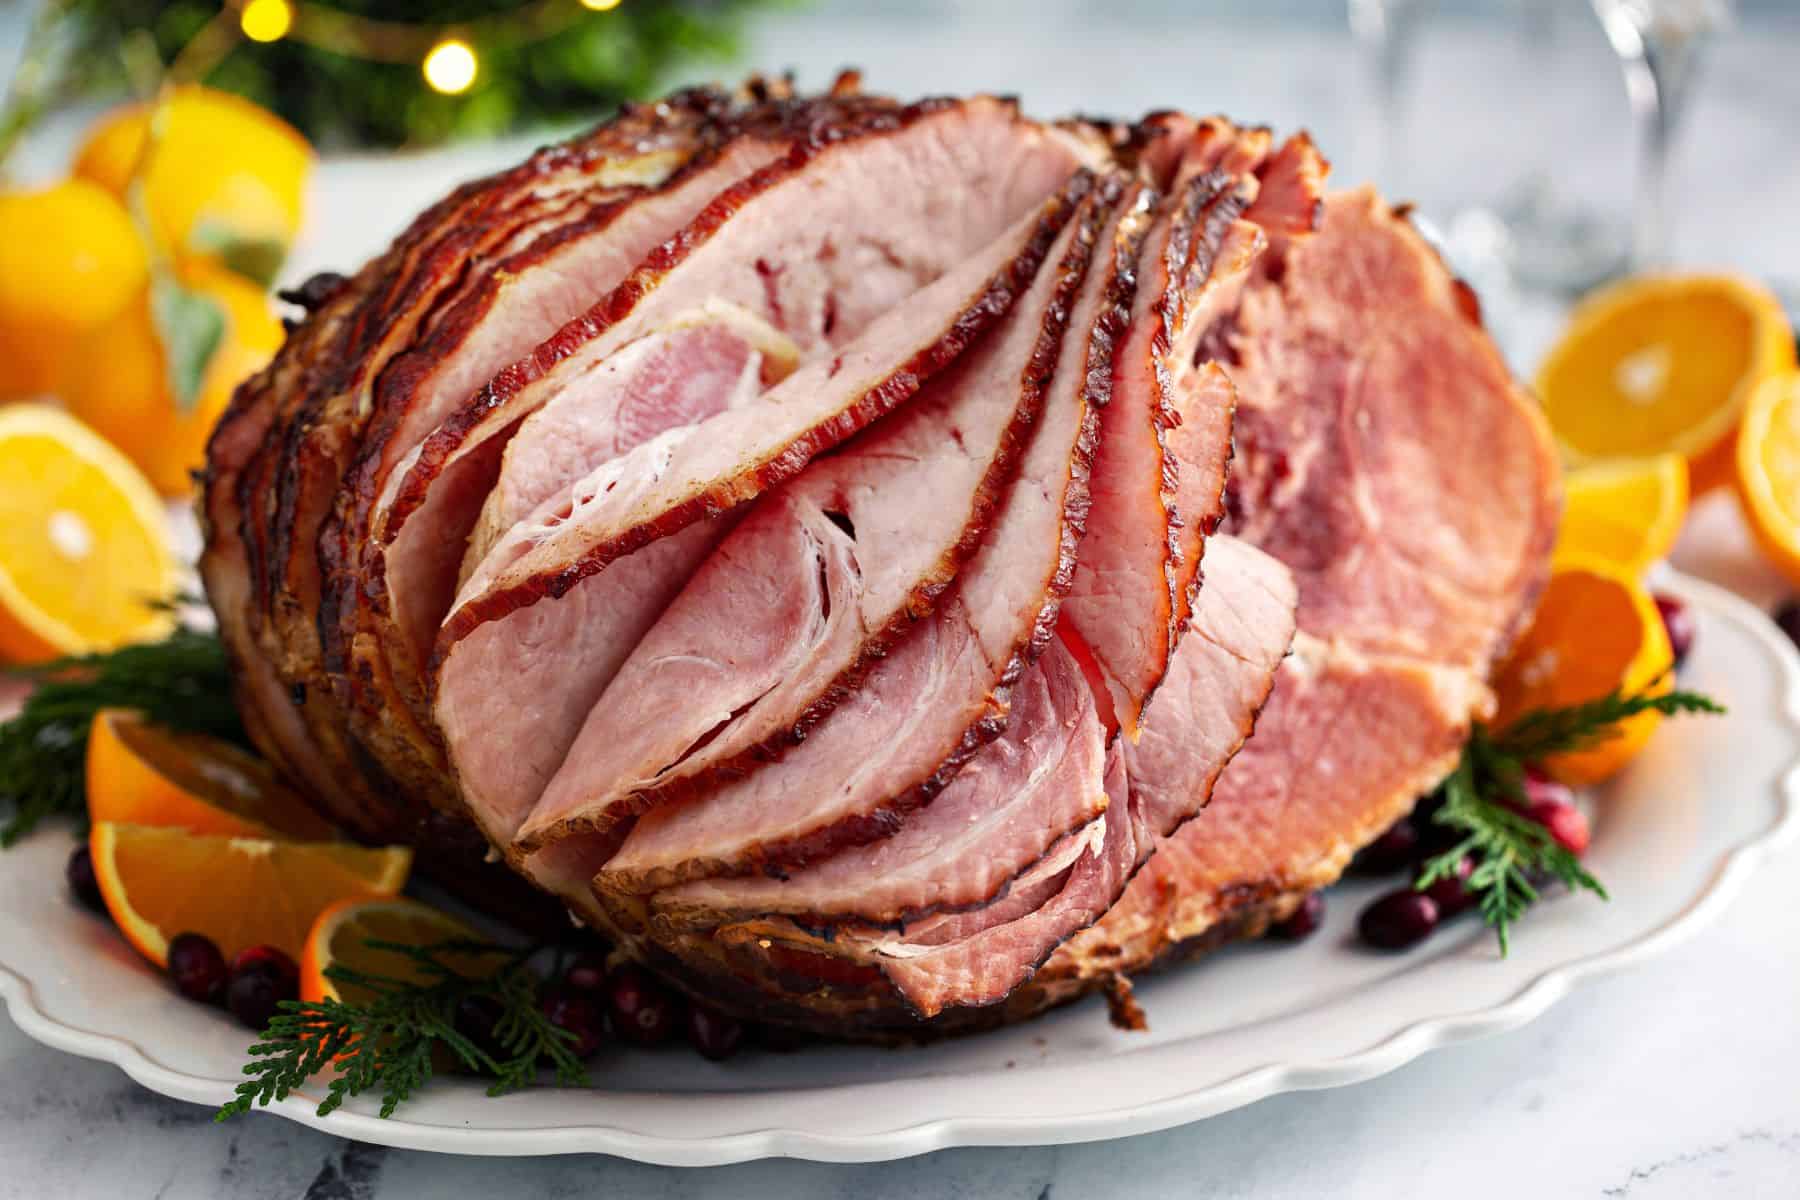 Crockpot spiral ham with orange slices and other garnishes in a platter with holiday decor behind.